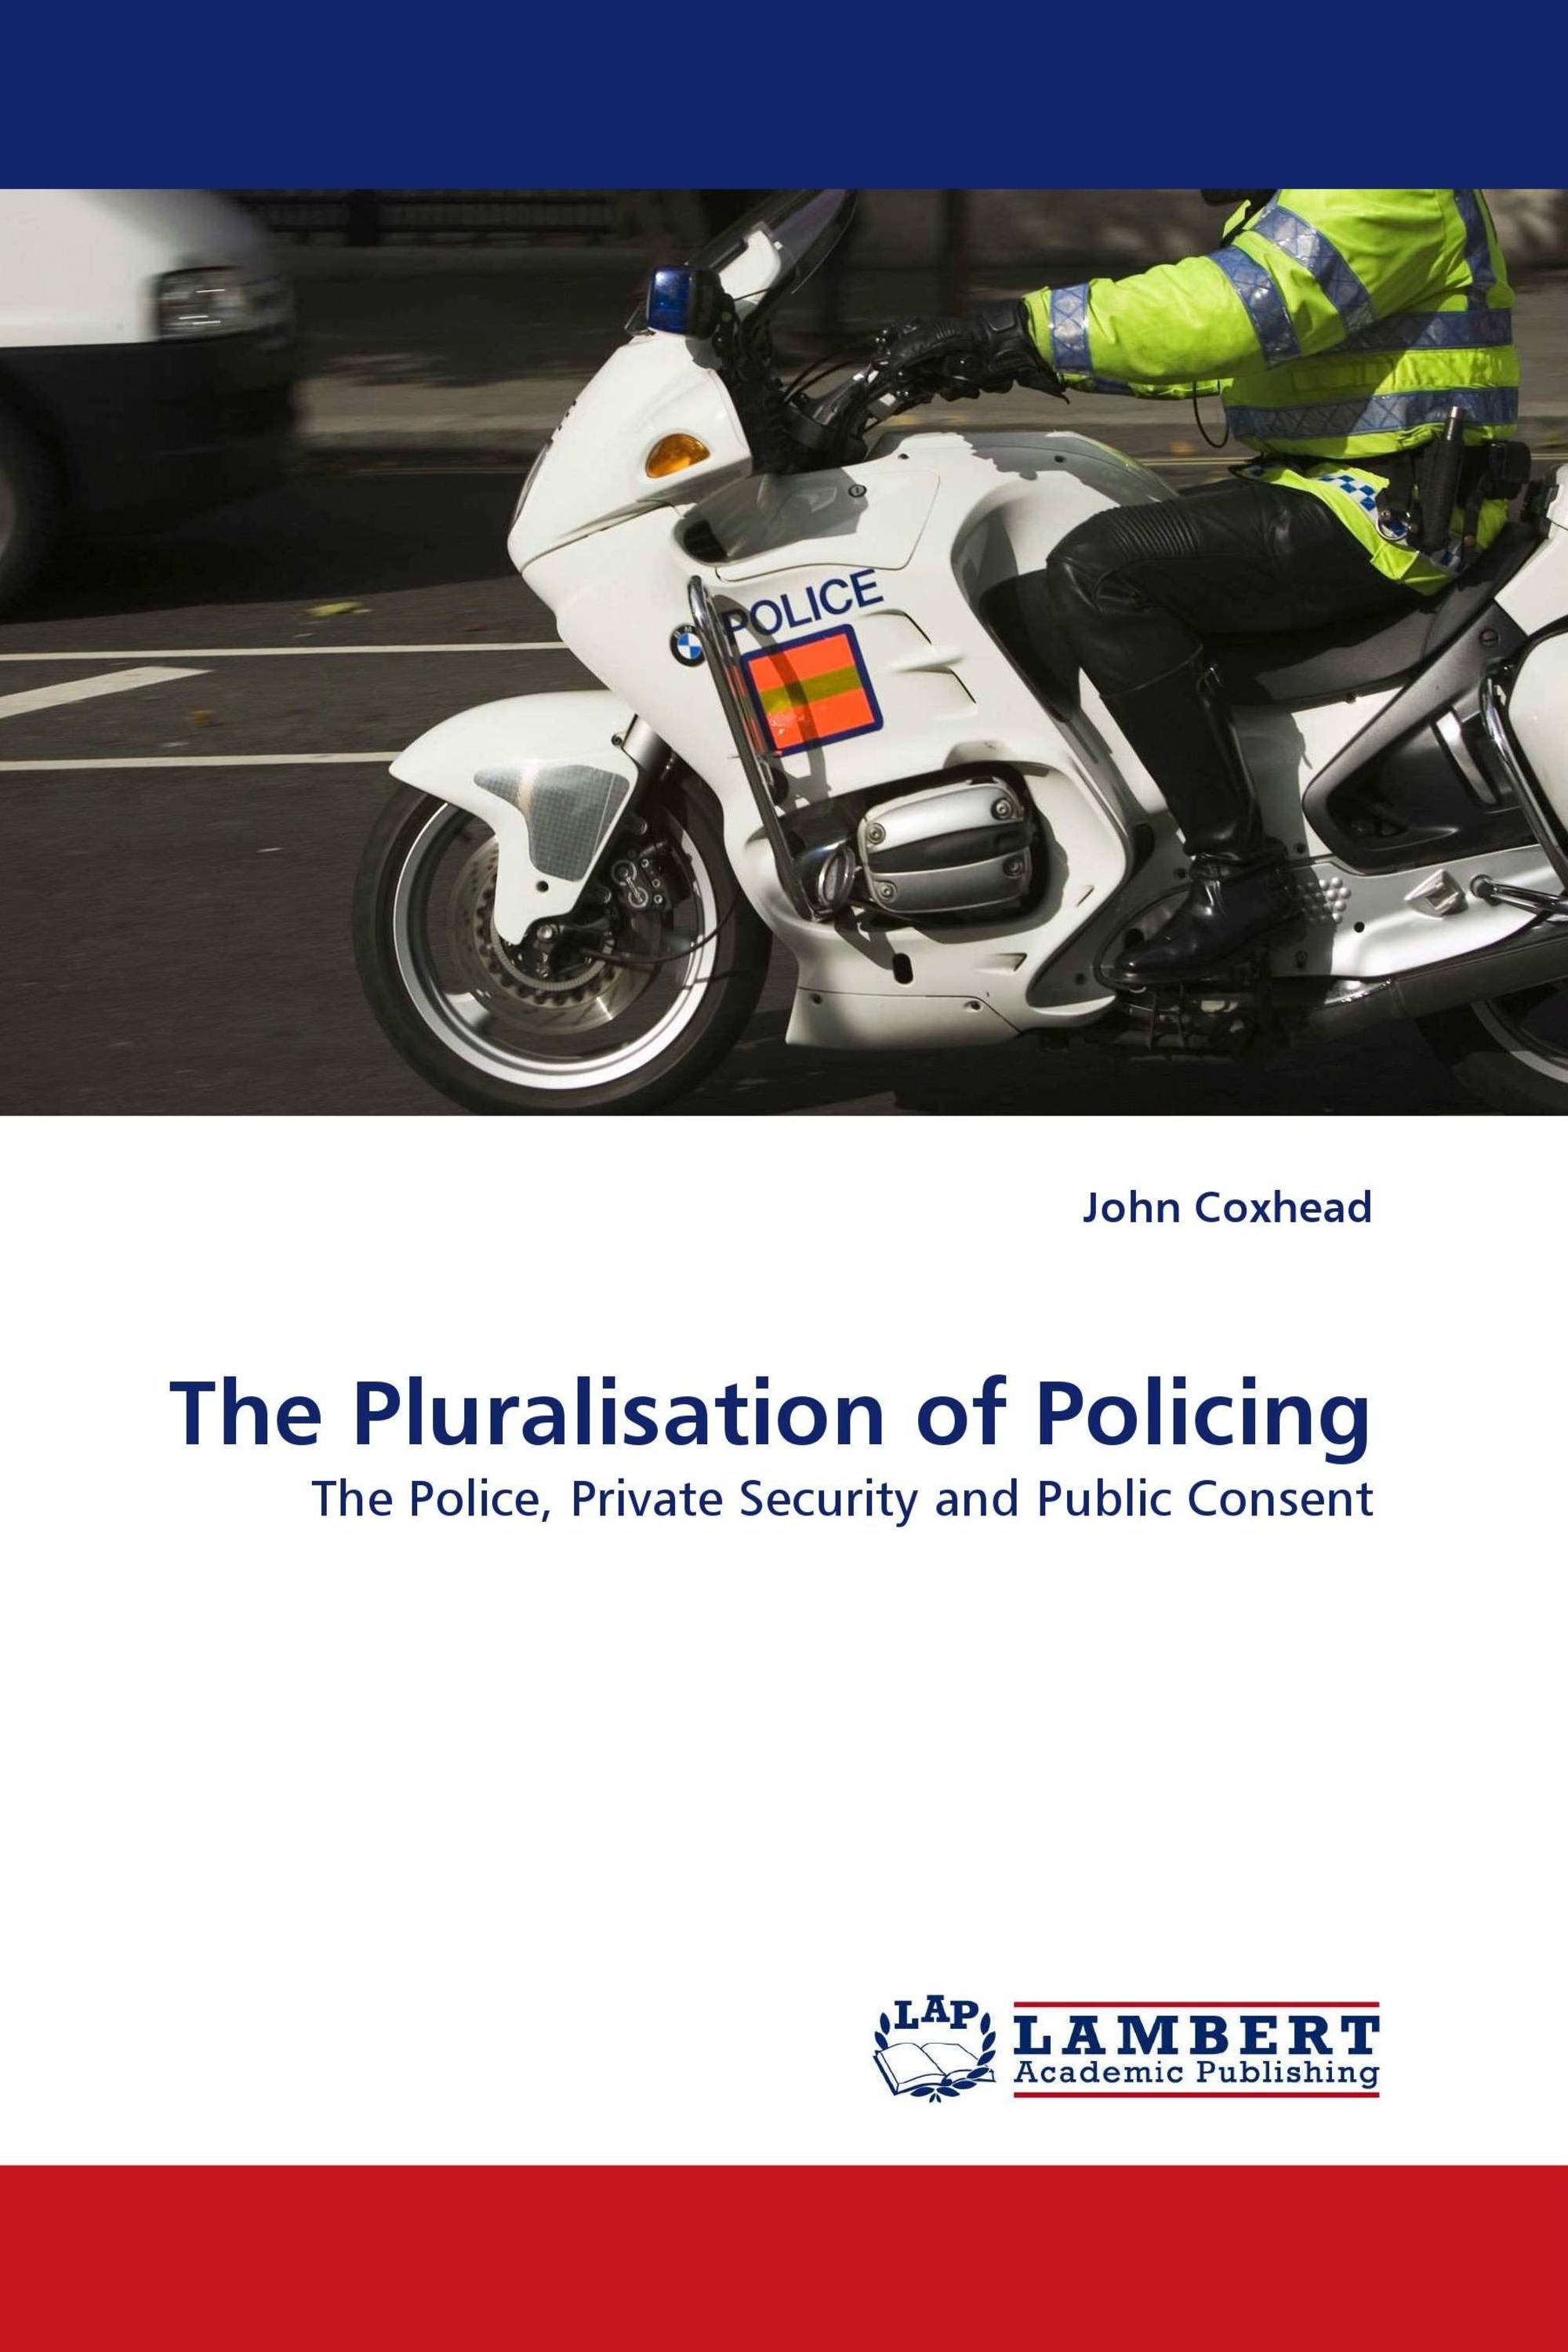 The Pluralisation of Policing